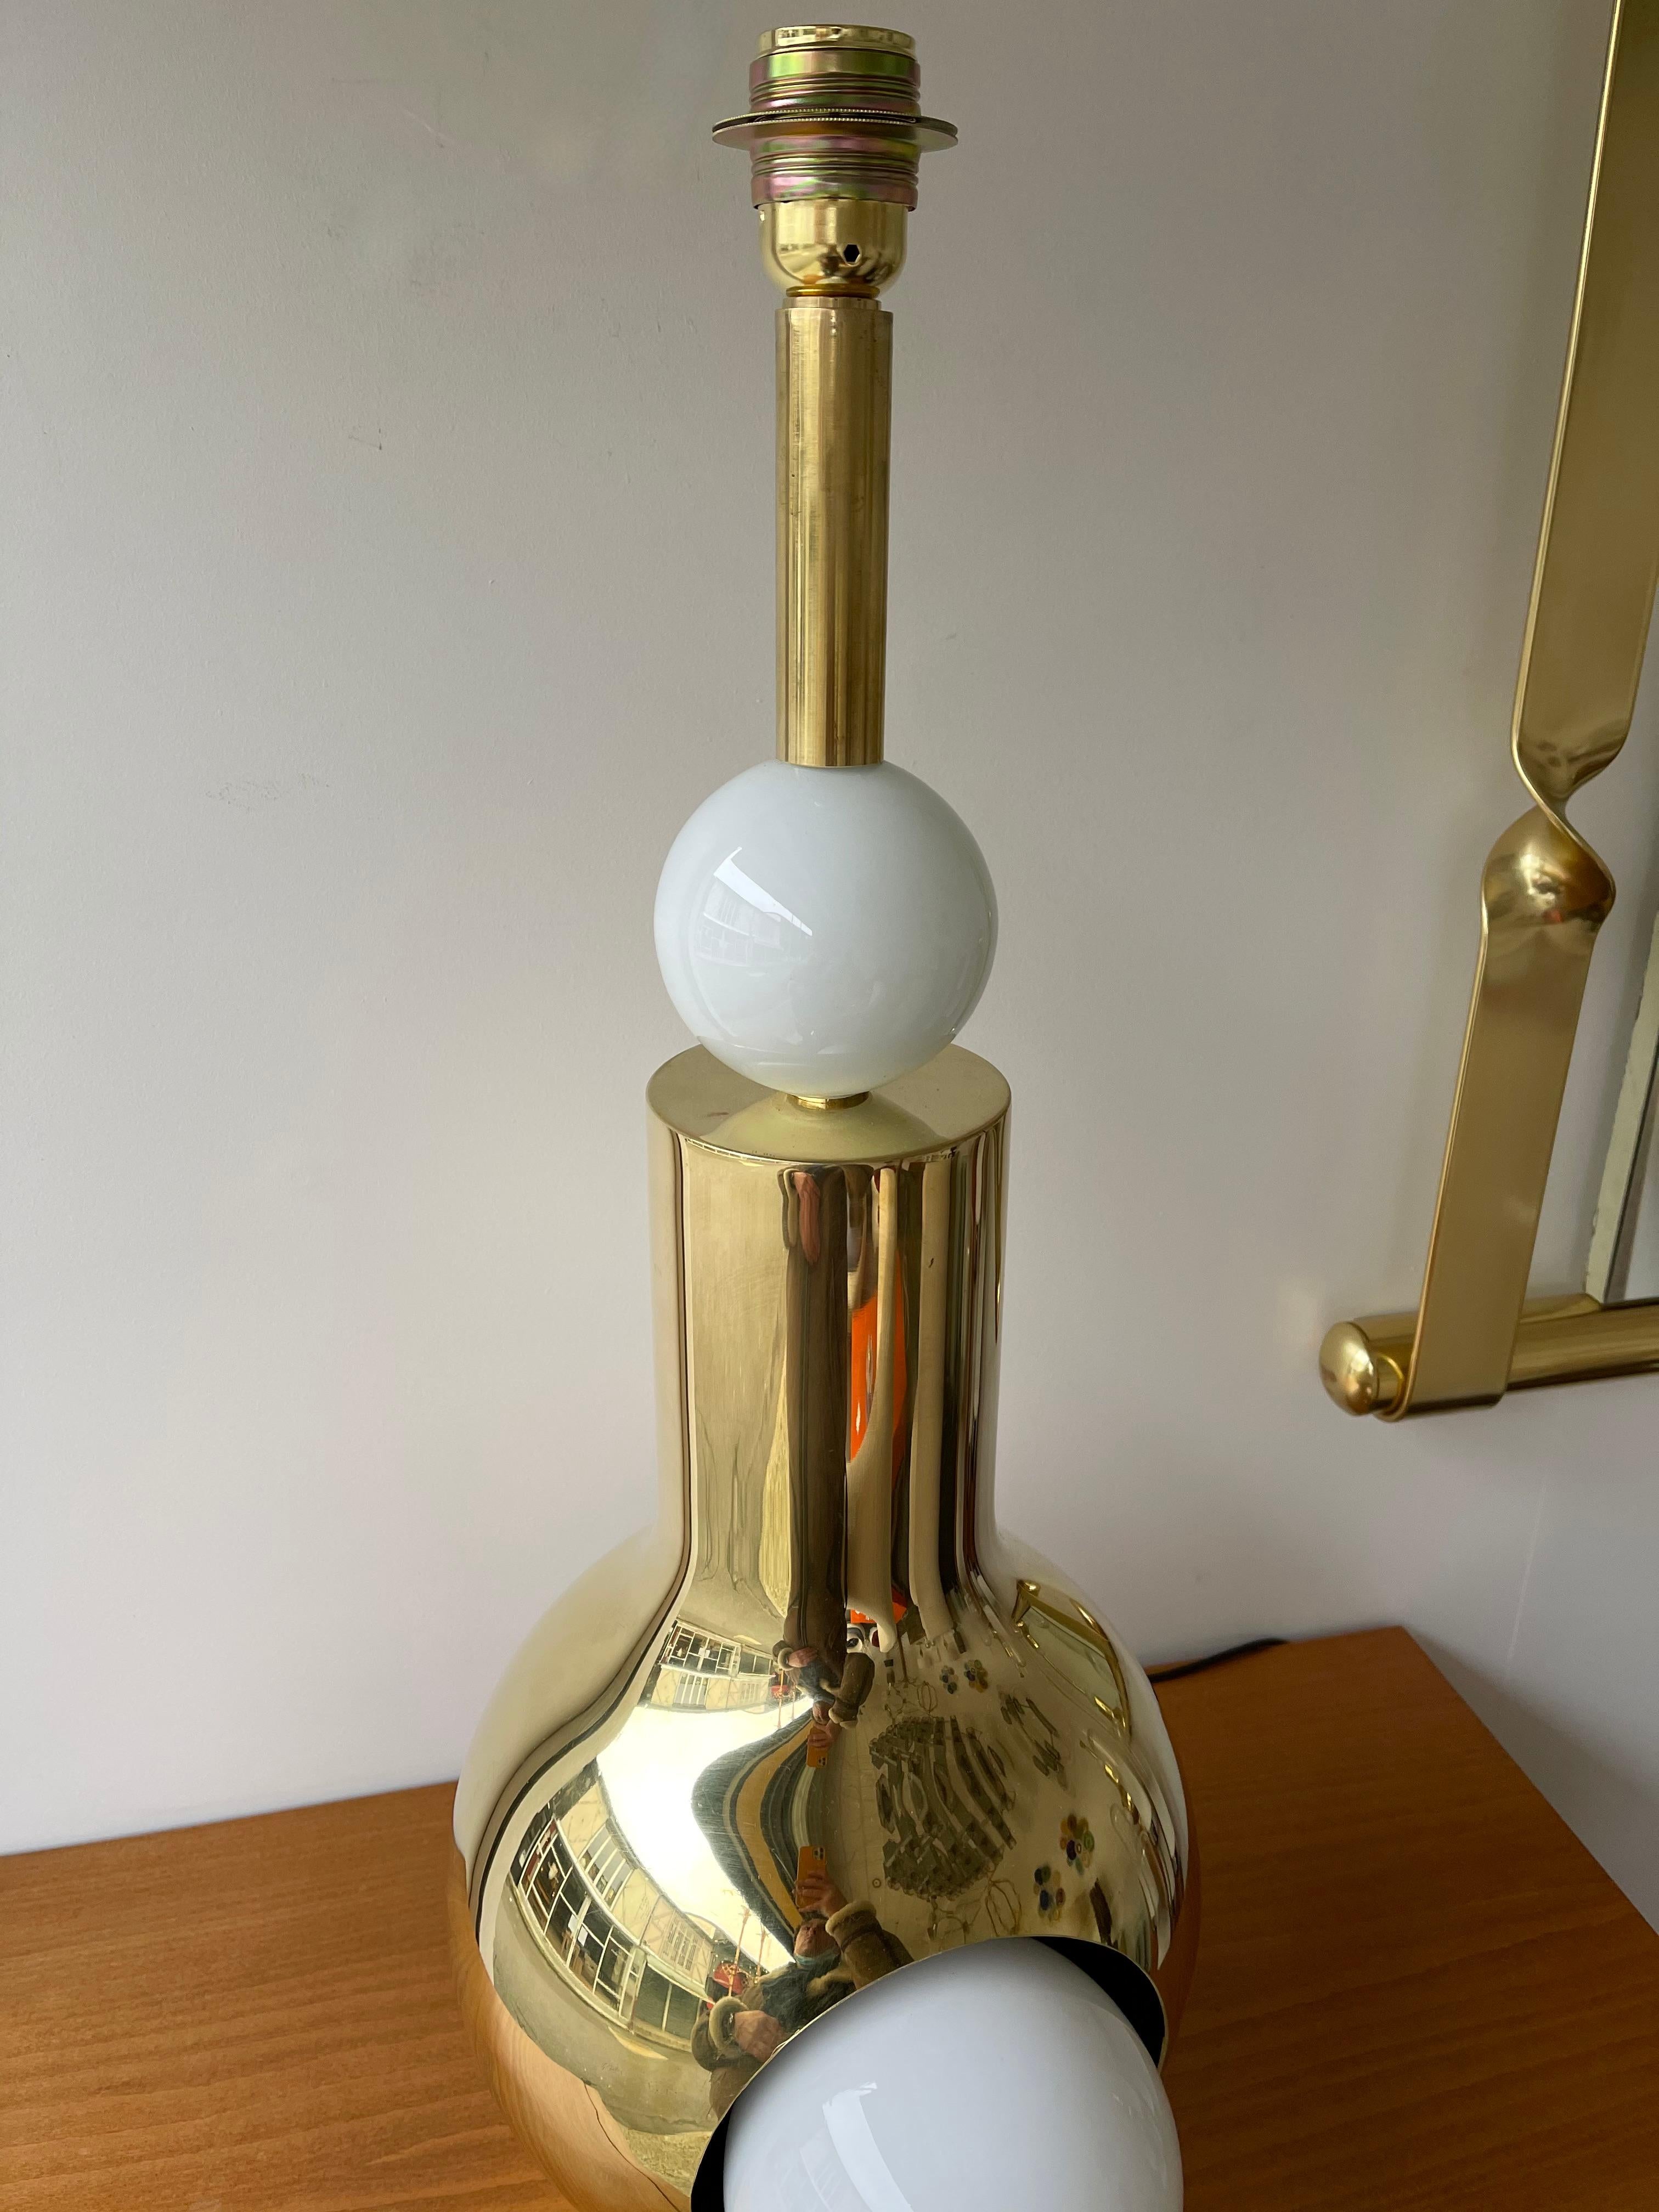 Pair of brass and Murano glass lightning eyes ball table or bedside lamps. Contemporary work from a small workshop.

Demo shades are not included. Measurements indicated with demo shades.
Measurements lamps only H 75 x W 25 x D 30 centimeters.